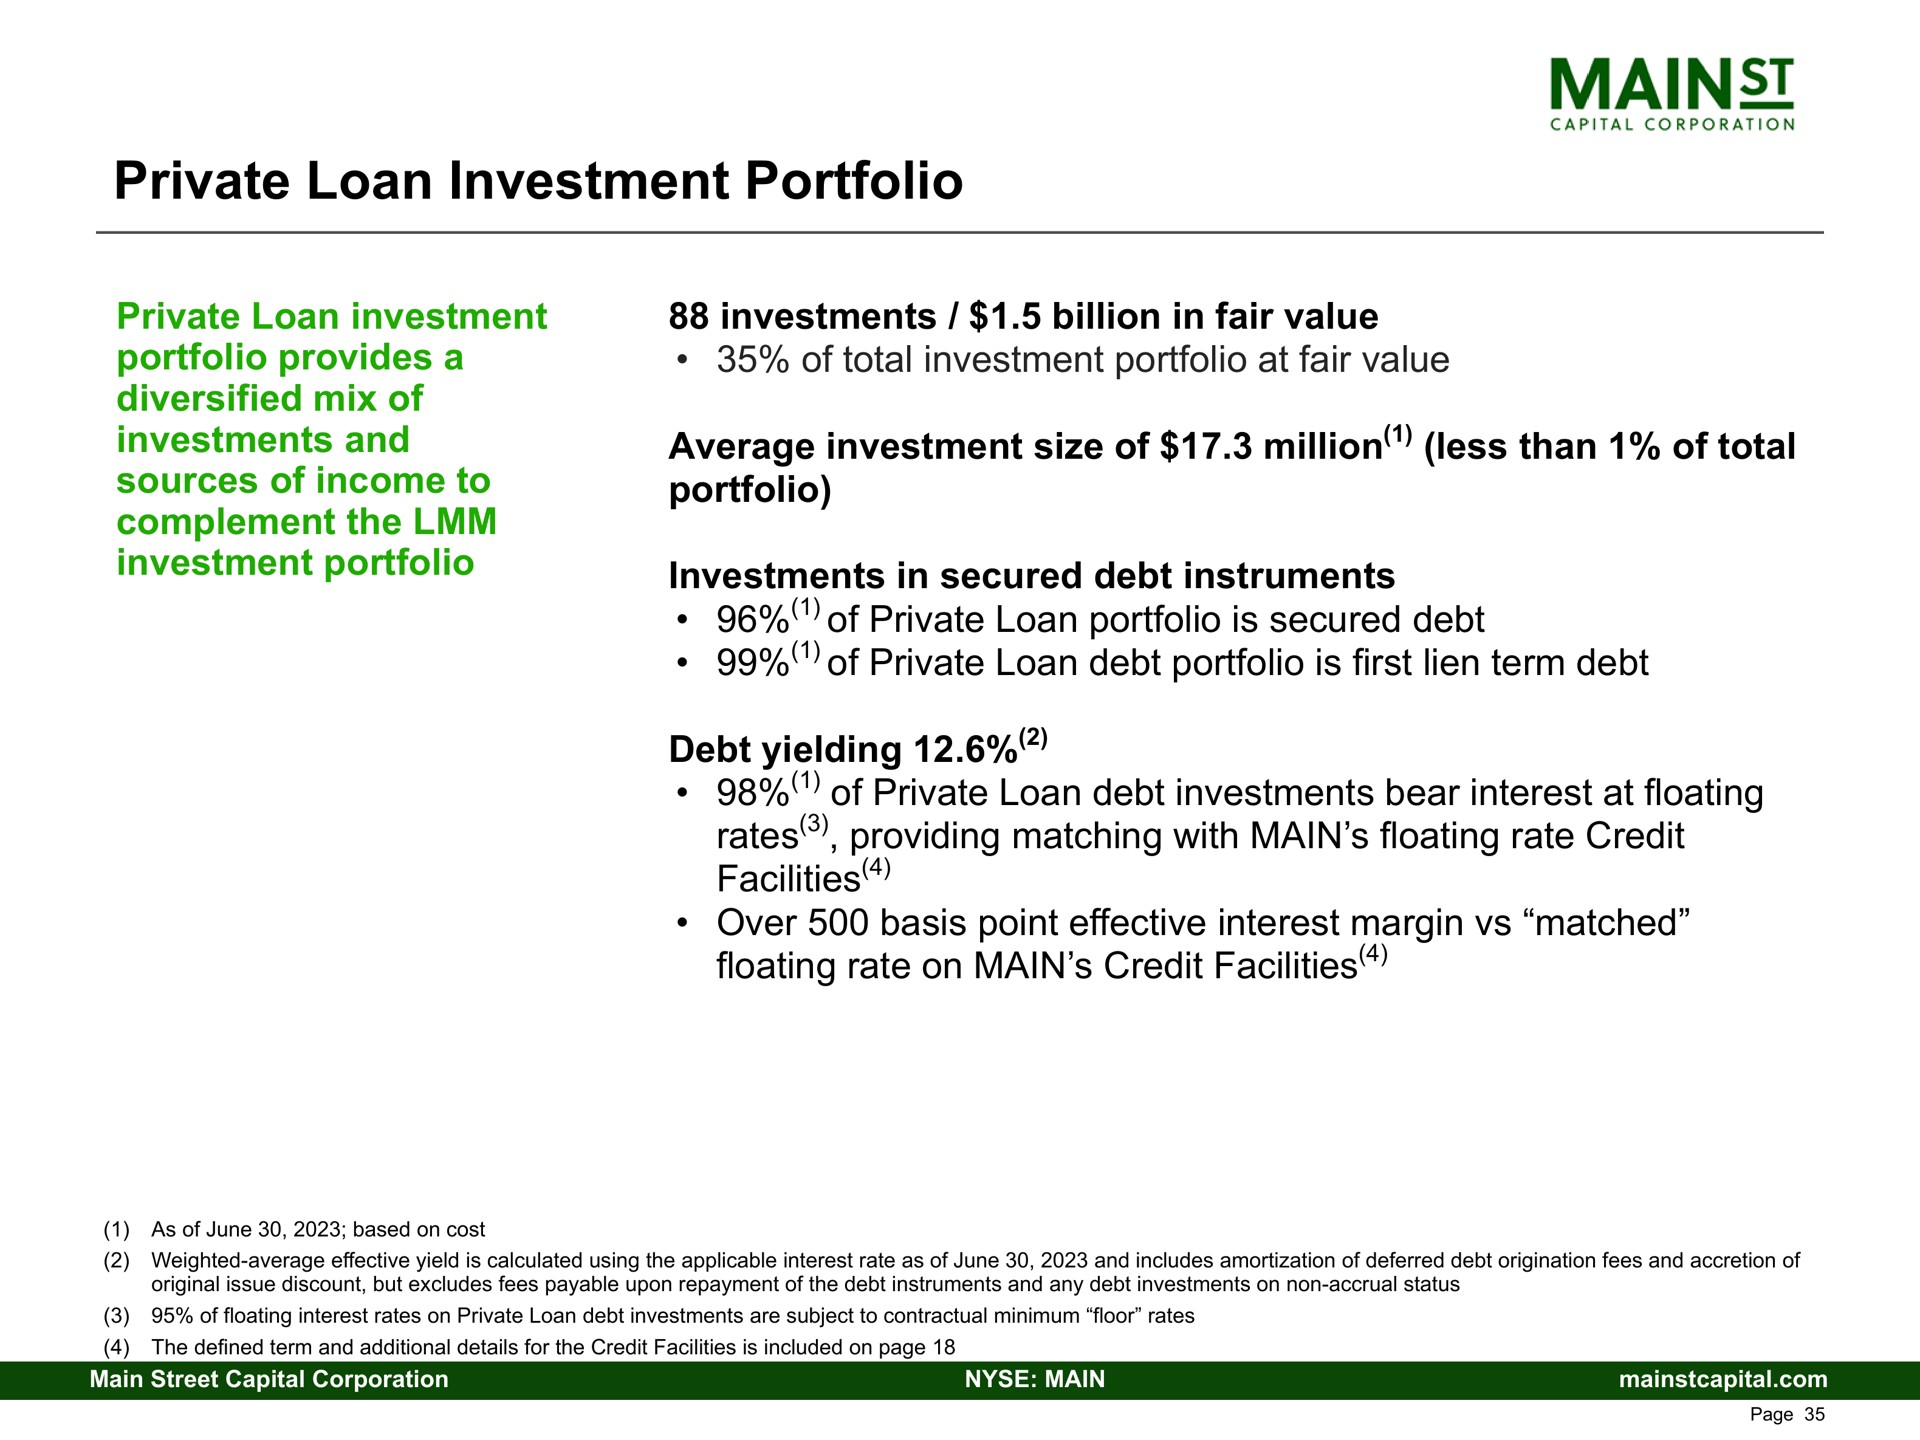 private loan investment portfolio private loan investment portfolio provides a diversified mix of investments and sources of income to complement the investment portfolio investments billion in fair value of total investment portfolio at fair value average investment size of million less than of total portfolio investments in secured debt instruments of private loan portfolio is secured debt of private loan debt portfolio is first lien term debt debt yielding of private loan debt investments bear interest at floating rates providing matching with main floating rate credit facilities over basis point effective interest margin matched floating rate on main credit facilities | Main Street Capital